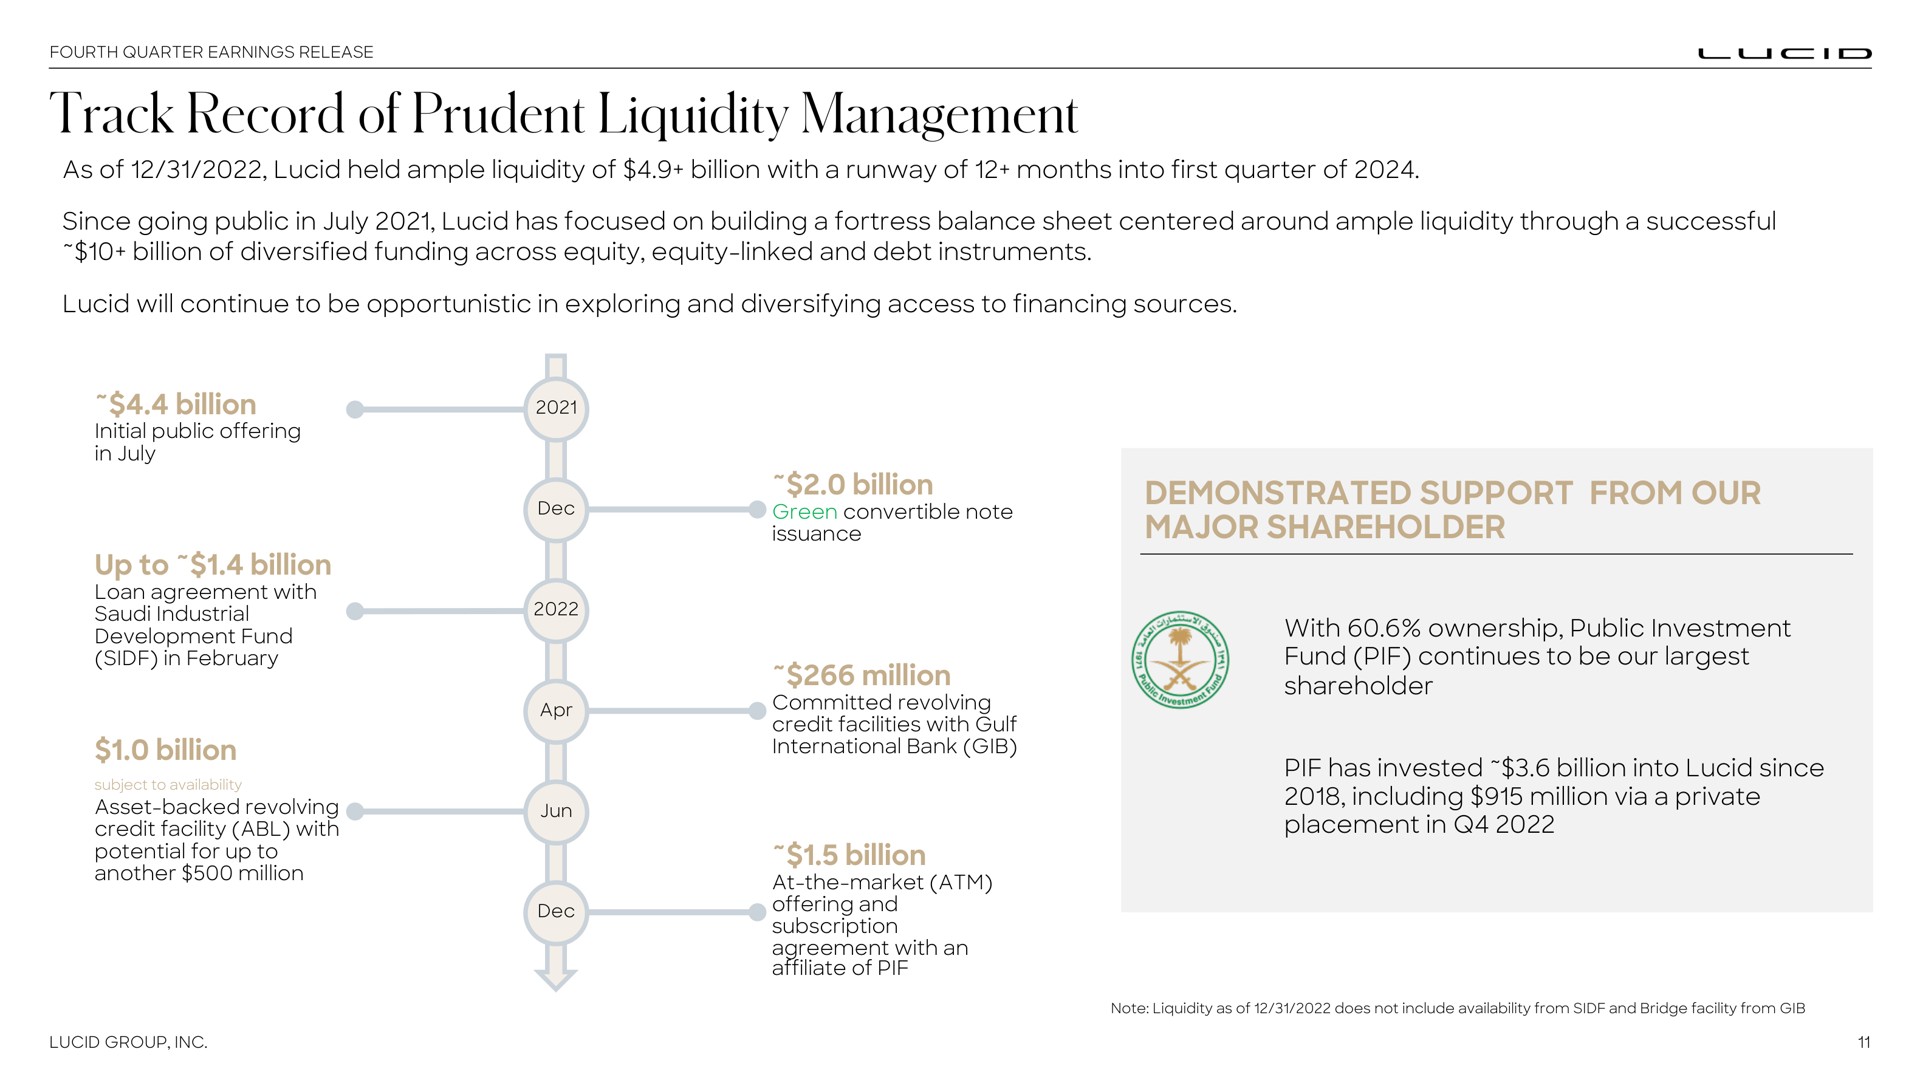 track record of prudent liquidity management demonstrated support from our major shareholder | Lucid Motors